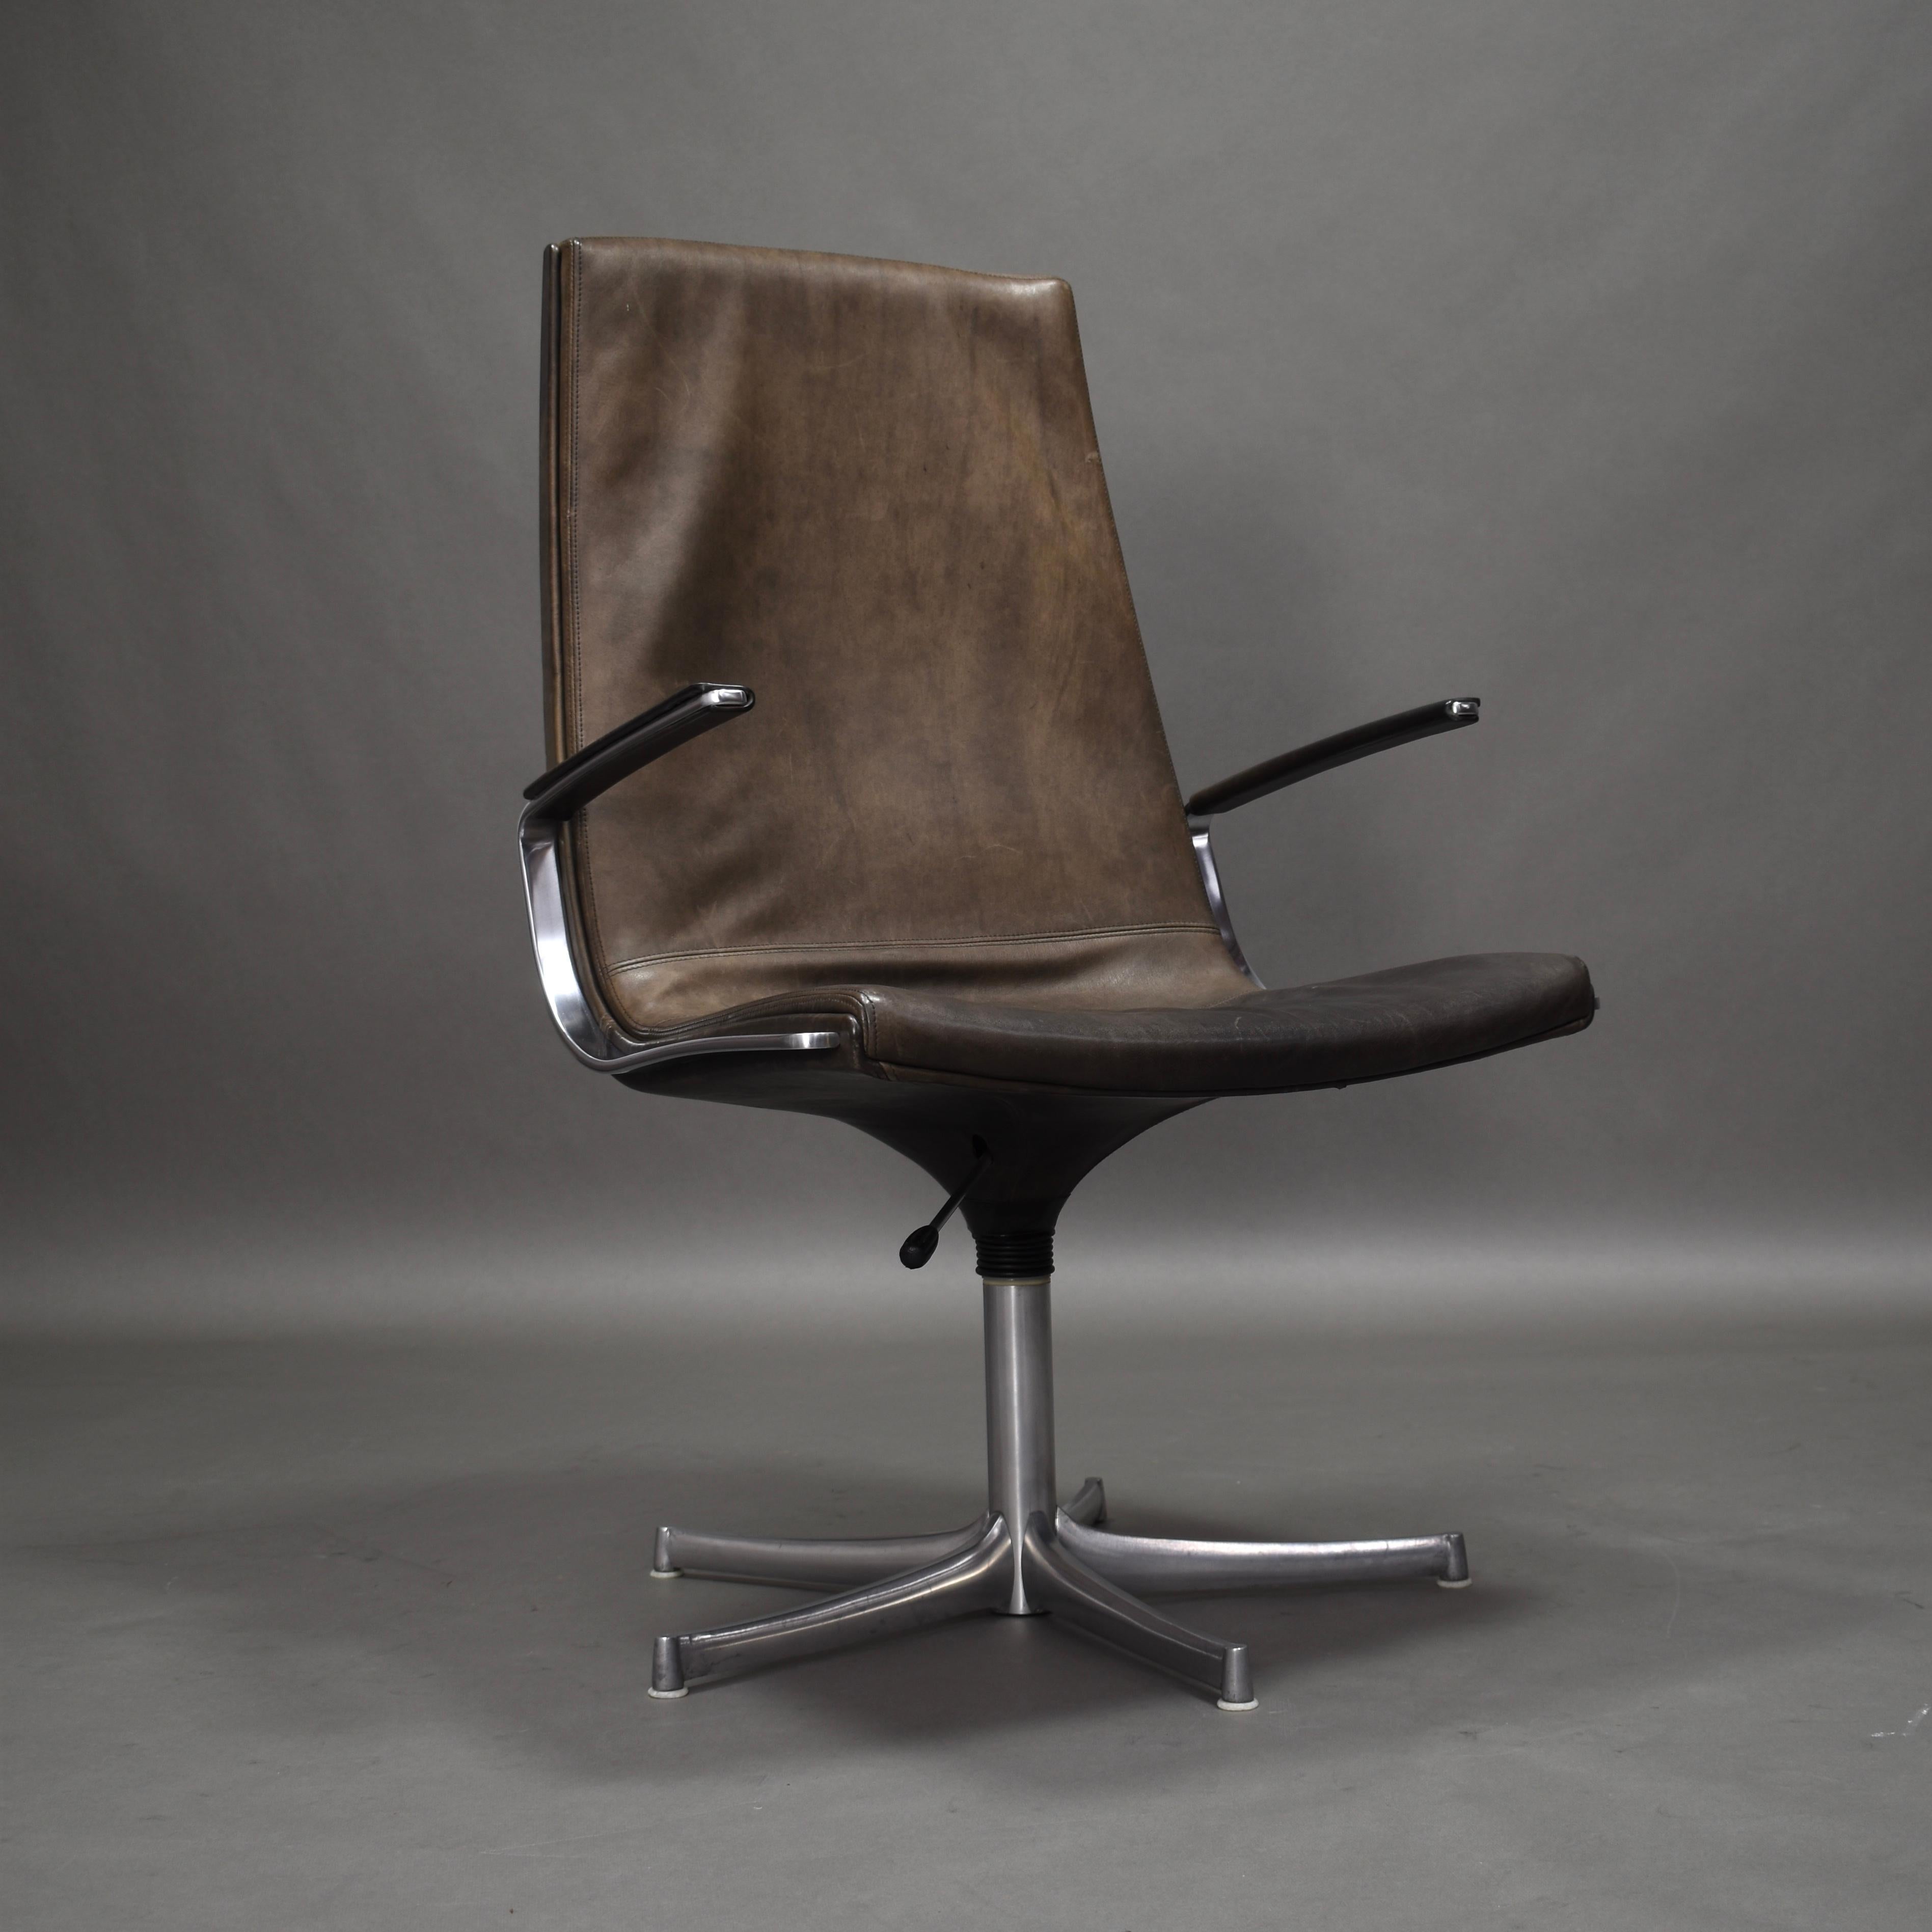 Walter Knoll office / conference / desk chairs – Germany, 1975. The chairs swivel 360º and are adjustable in height. 2 chairs available. Also sold per piece.

In very good condition with beautiful patinated leather and thorough polished aluminum.